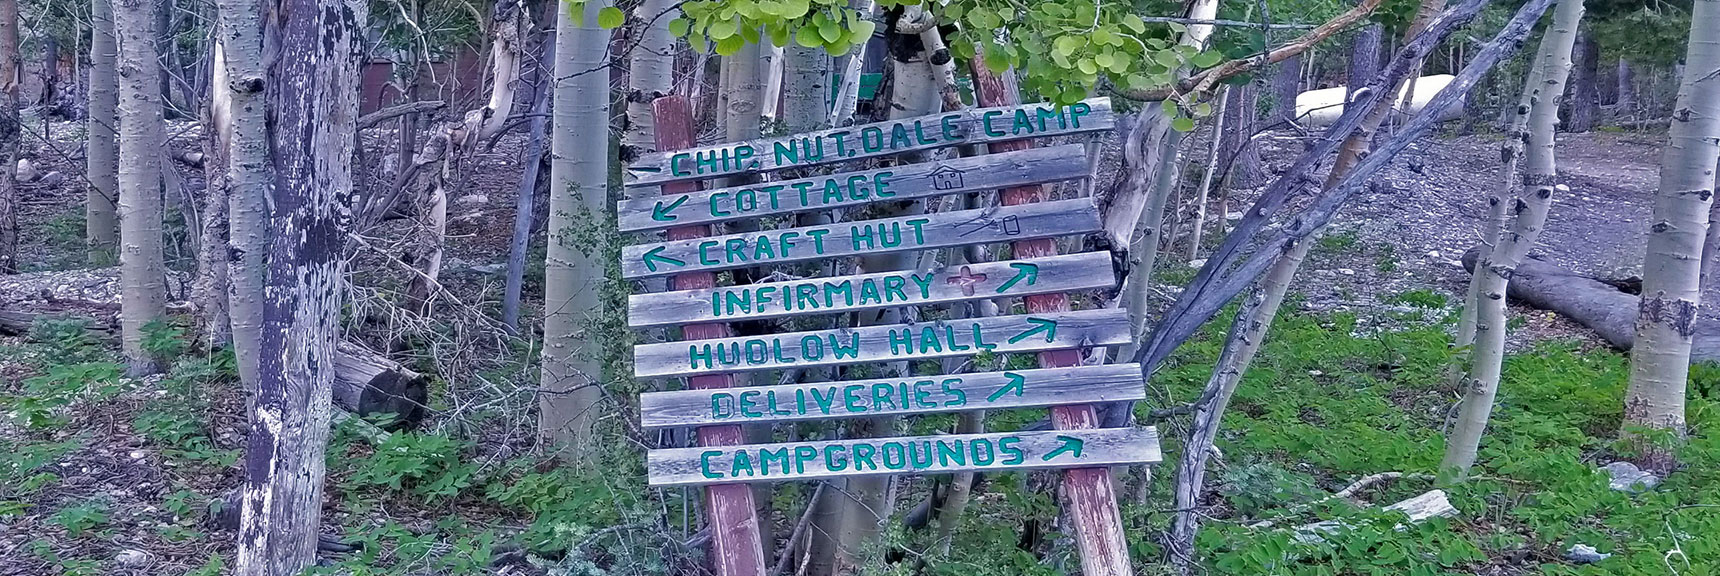 Directional Signs to Various Points at Camp Foxtail Girl Scouts Camp | Lee to Kyle Canyon | Foxtail Approach | Mt Charleston Wilderness | Spring Mountains, Nevada